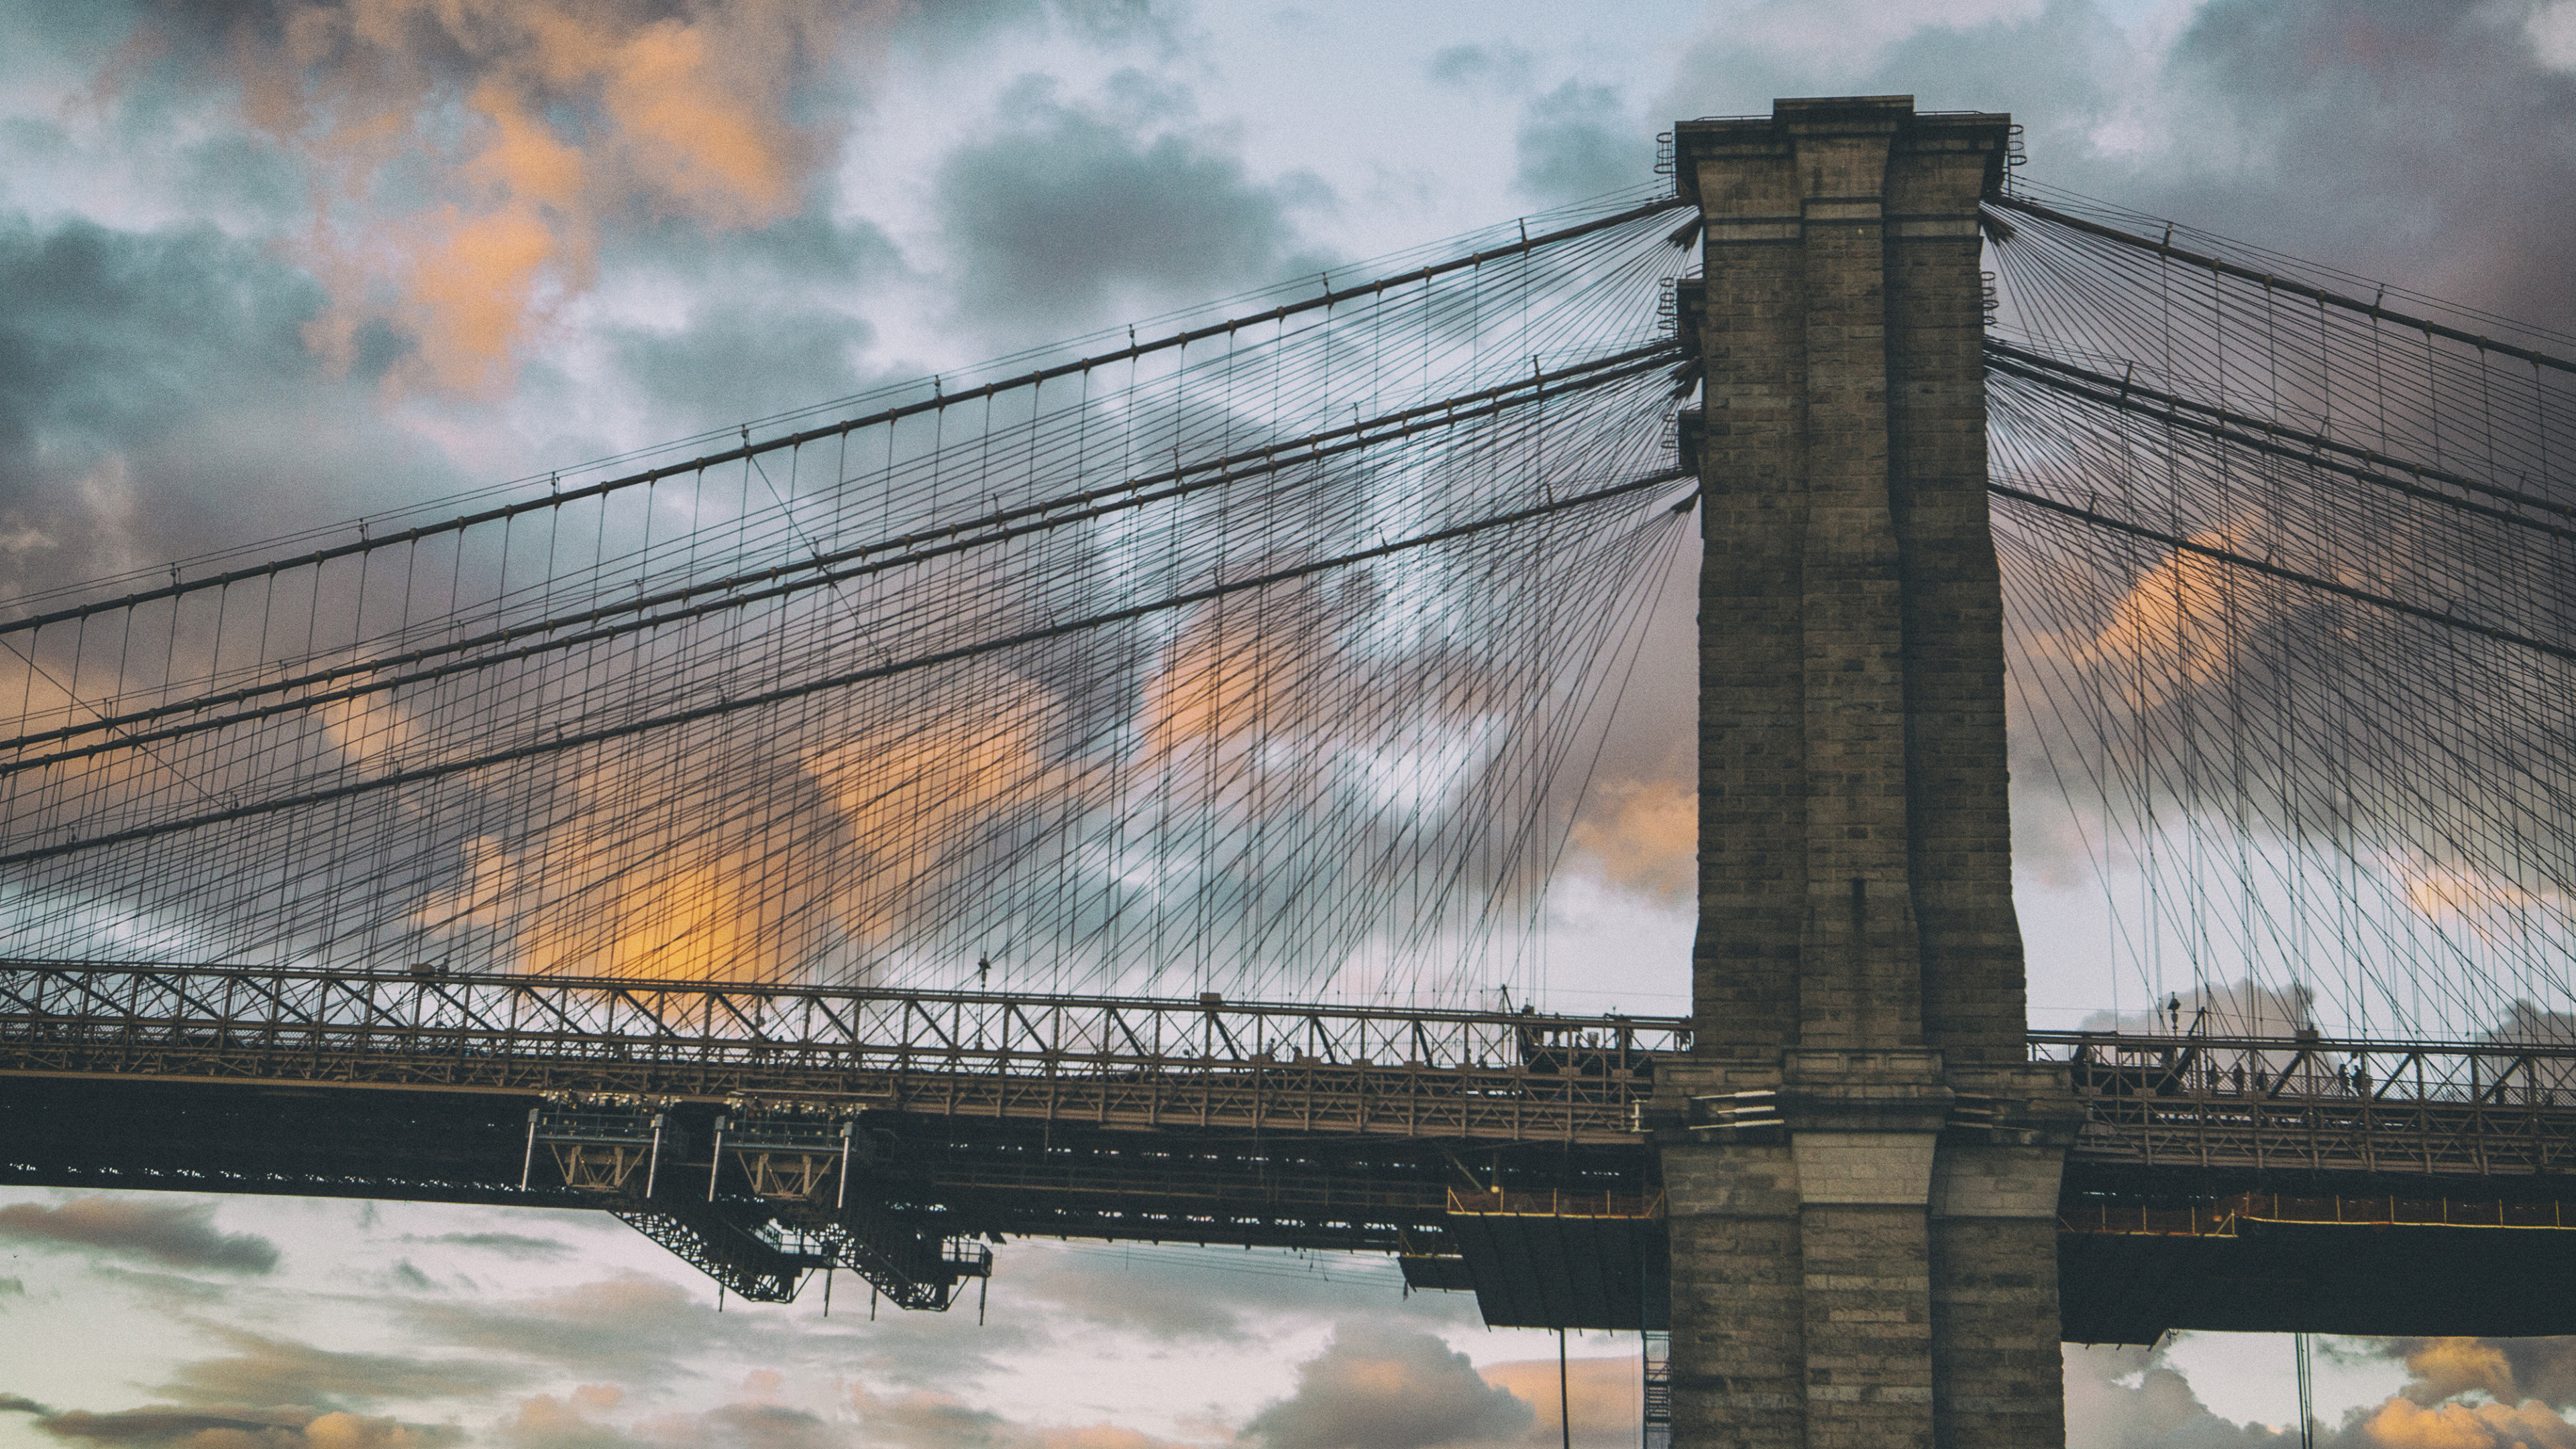 Wallpaper Brooklyn Bridge New York Dumbo In Brooklyn Clouds Sunset Architecture 6183 Page 35